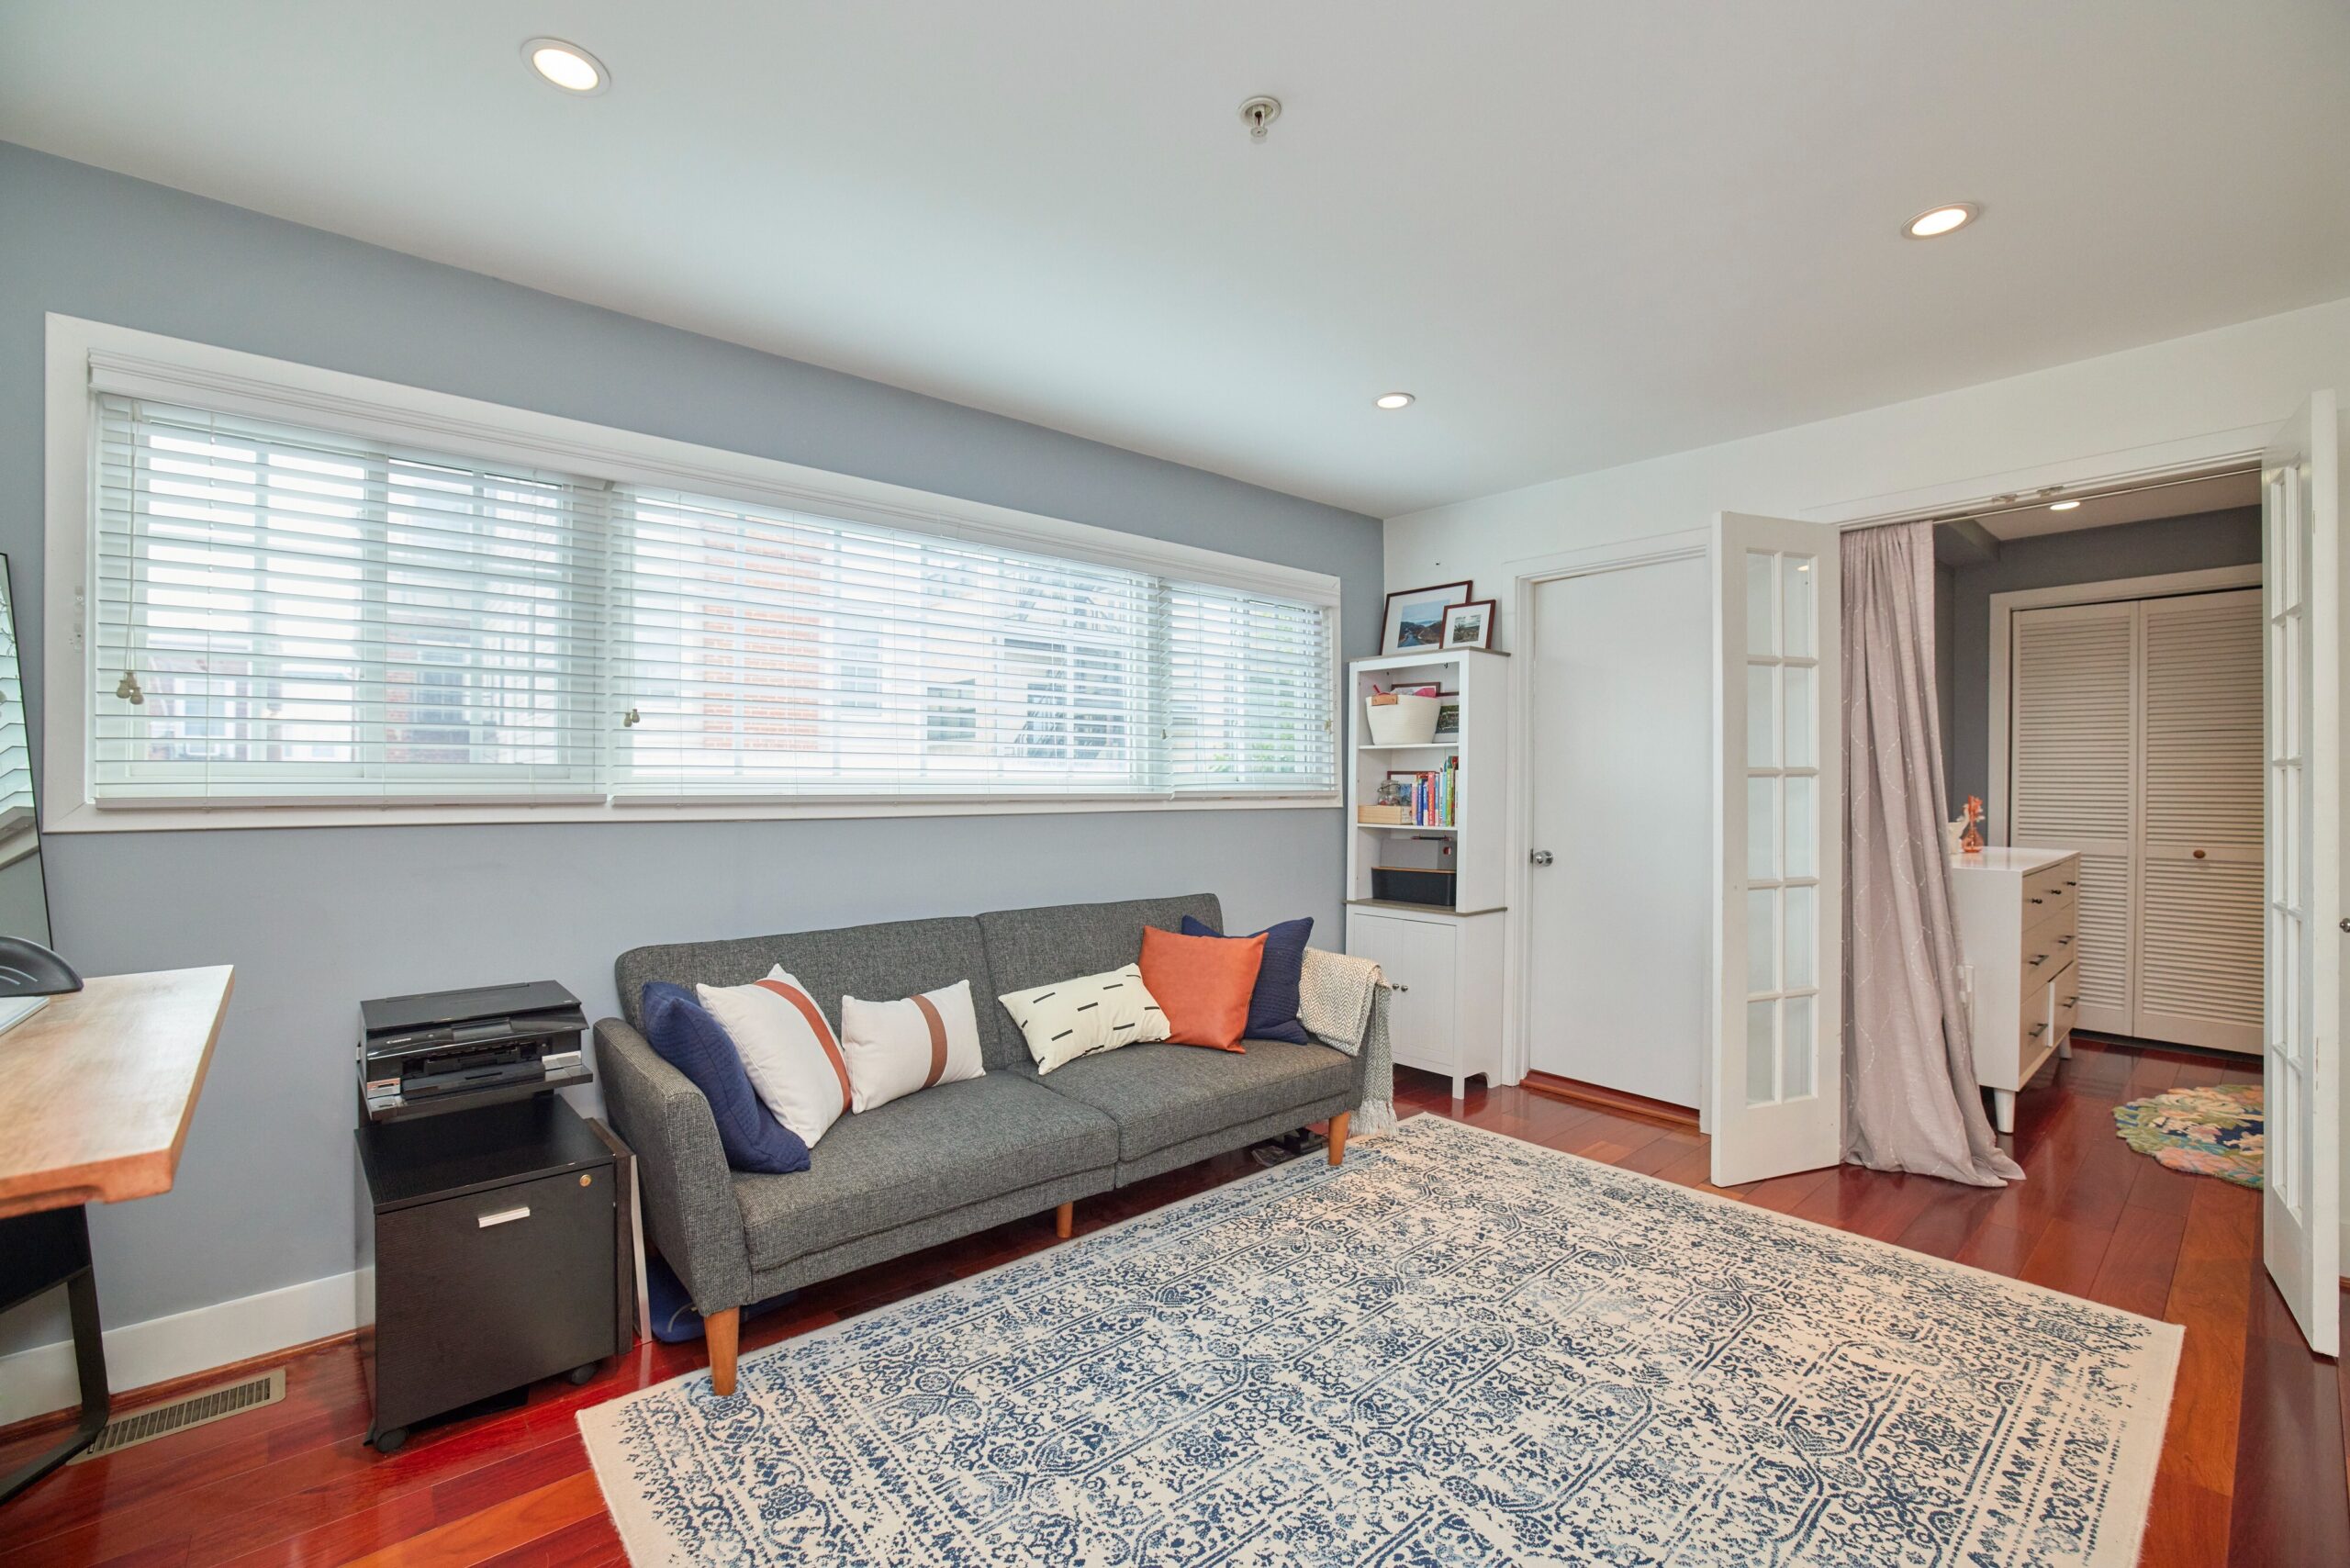 Professional interior photo of 1459 Harvard St NW #6 - showing the loft area with desk and couch and door to bathroom